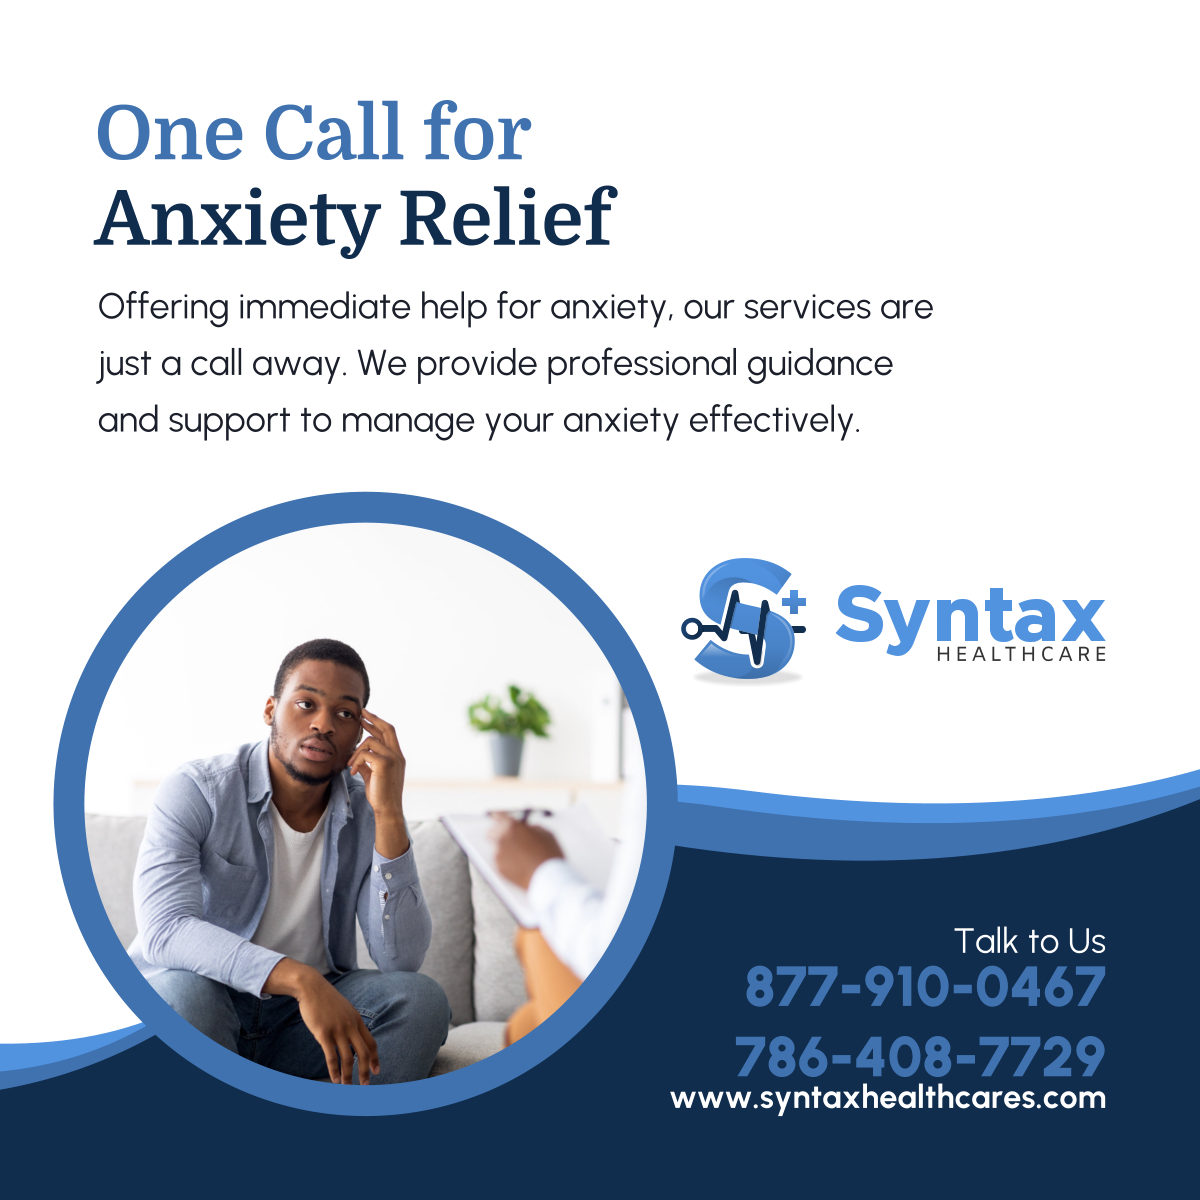 Find immediate support for anxiety with our expert team. We're dedicated to guiding you towards learning effective strategies. Embrace our compassionate care for anxiety management! 

#StockbridgeGA #AnxietyRelief #PsychiatricMedicalClinic #AnxietyTreatment #ManagingAnxiety